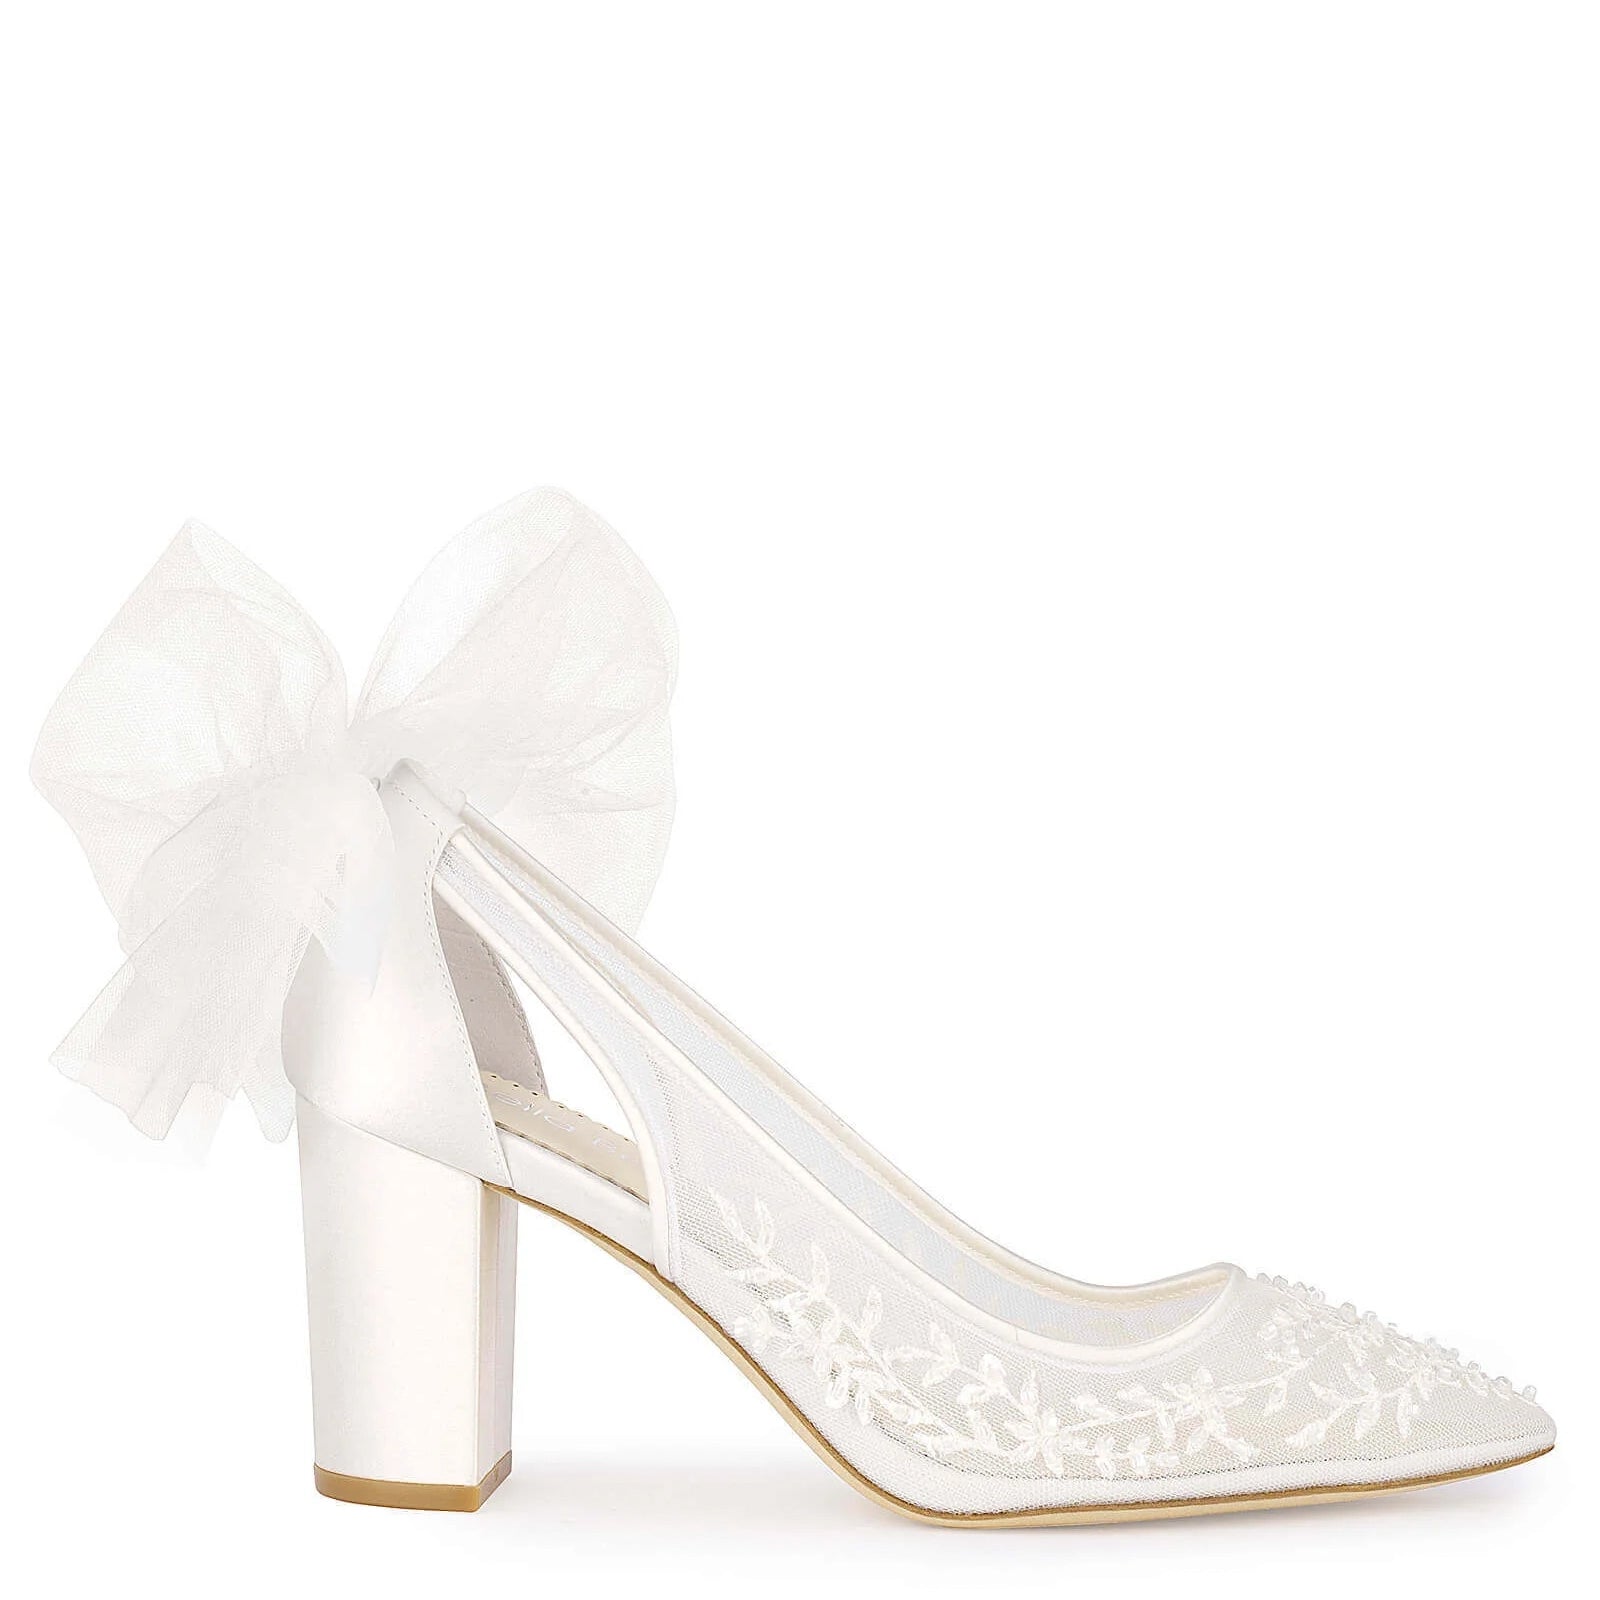 Easton - Block Heel Wedding Shoes With Tulle Bow